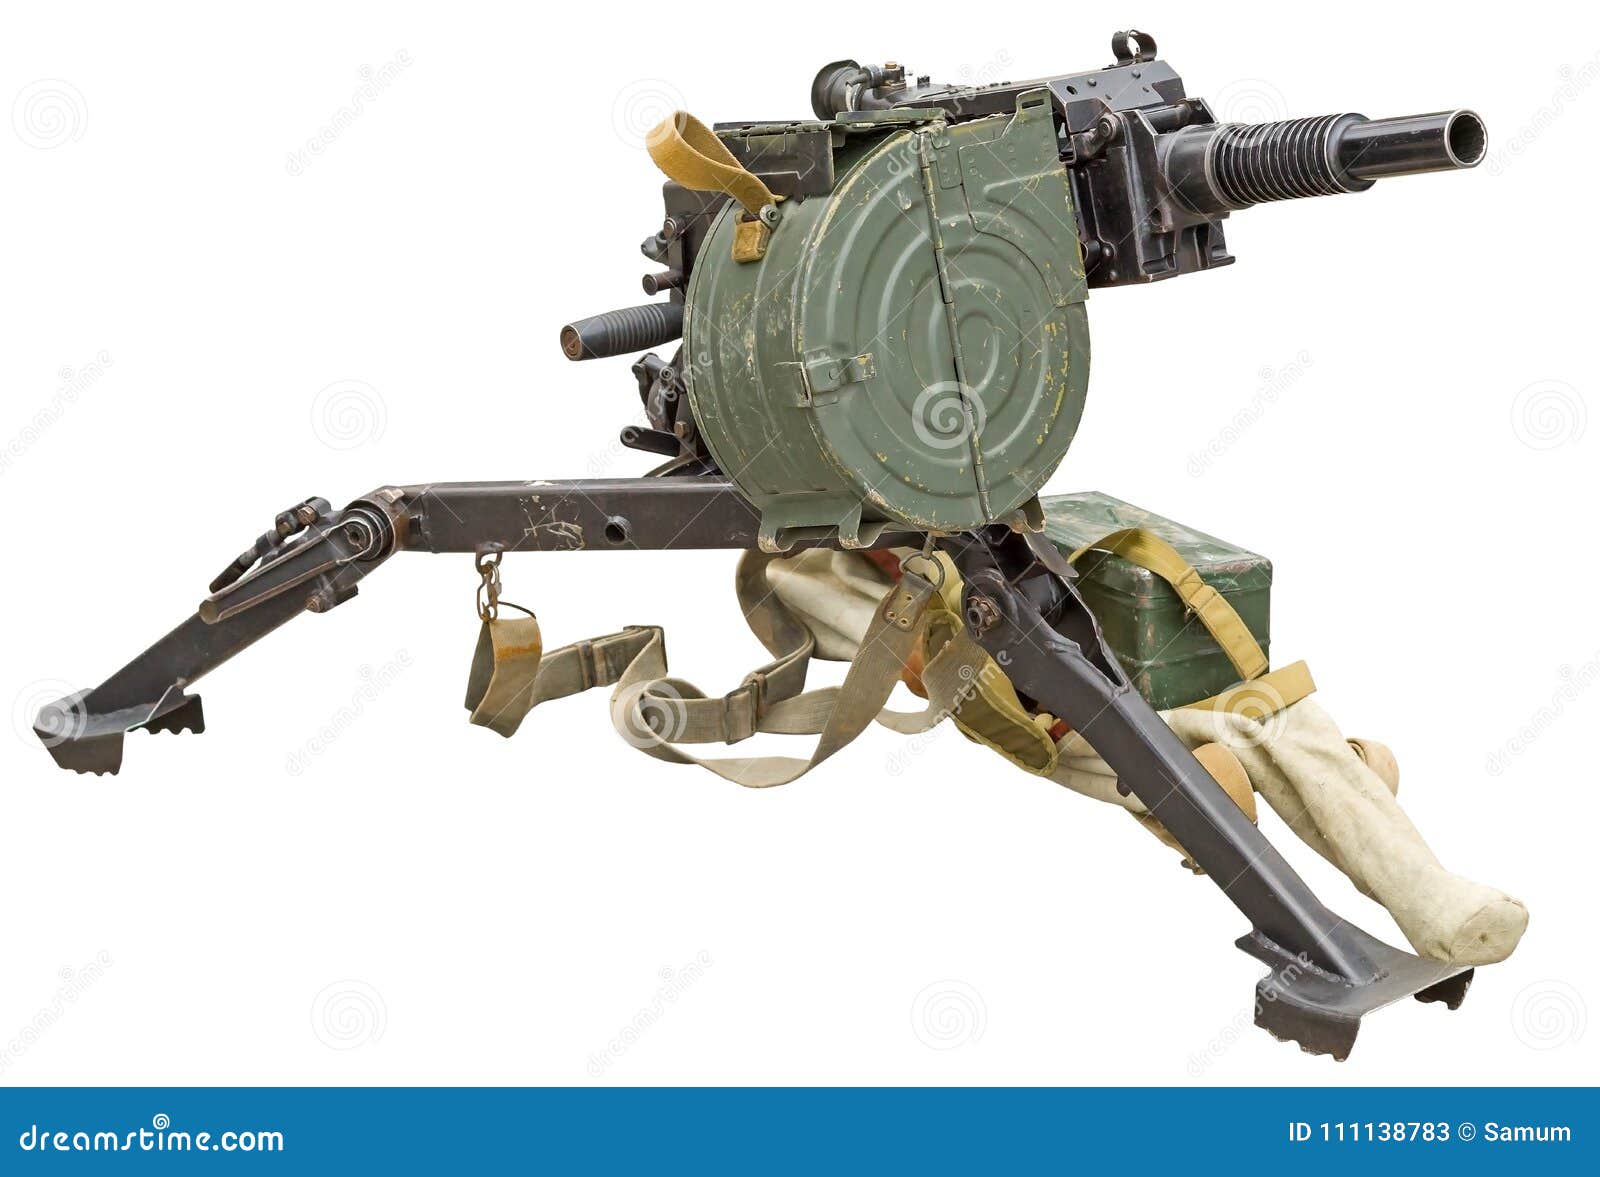 Poster 30 mm ags-17 automatic grenade launcher